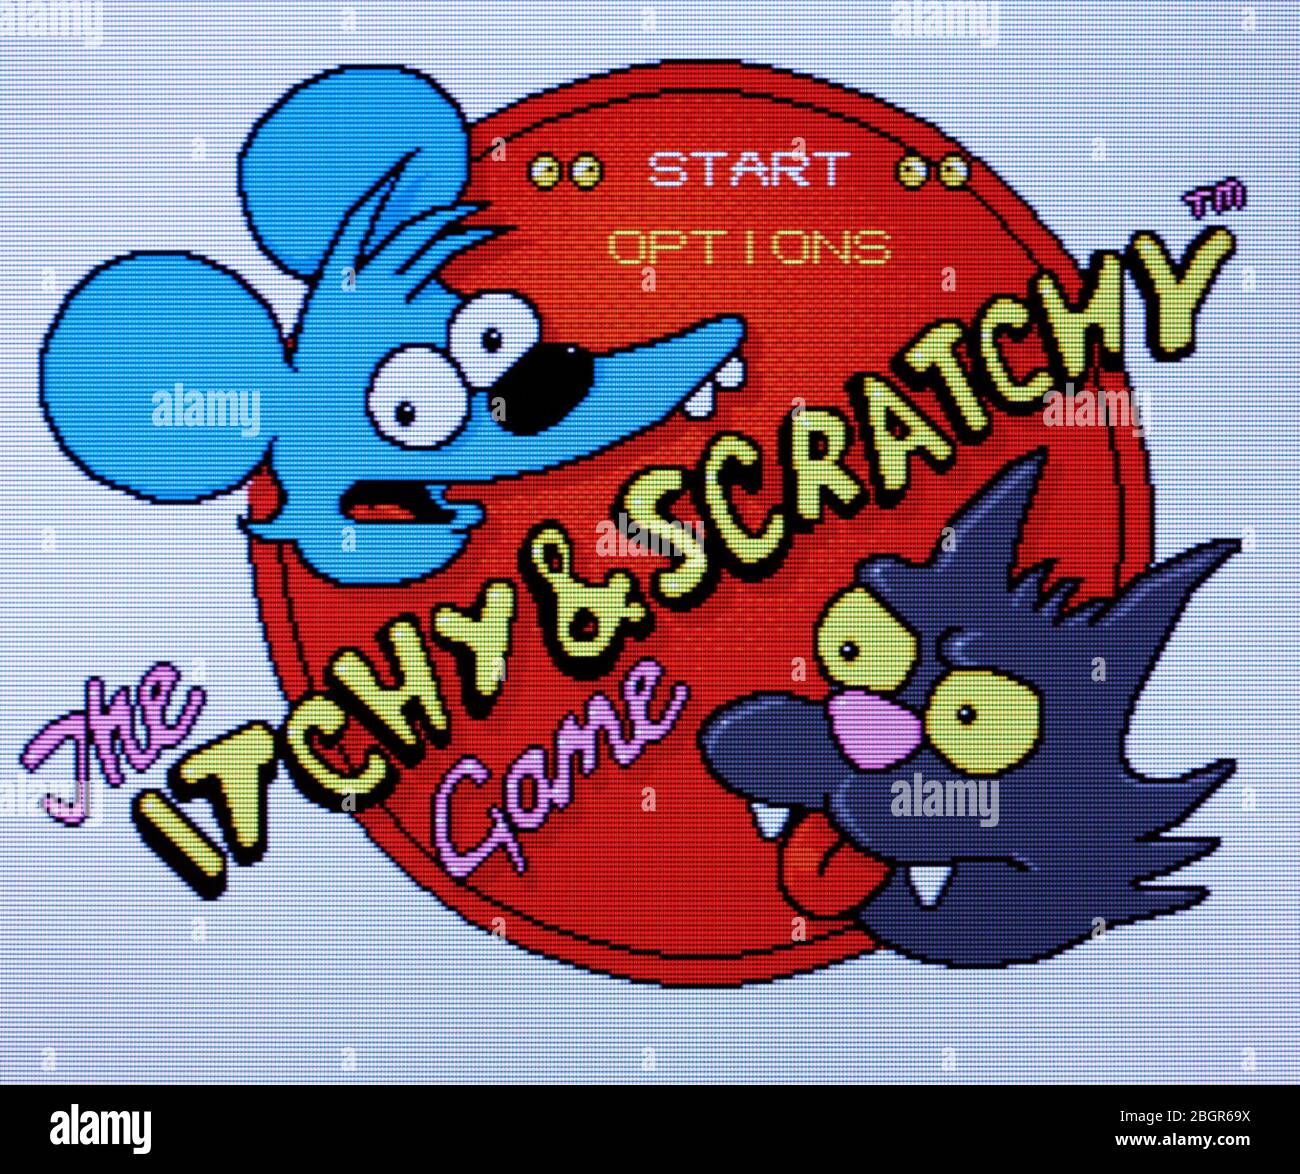 The Itchy & Scratchy Game - Sega Genesis Mega Drive - Editorial use only Stock Photo